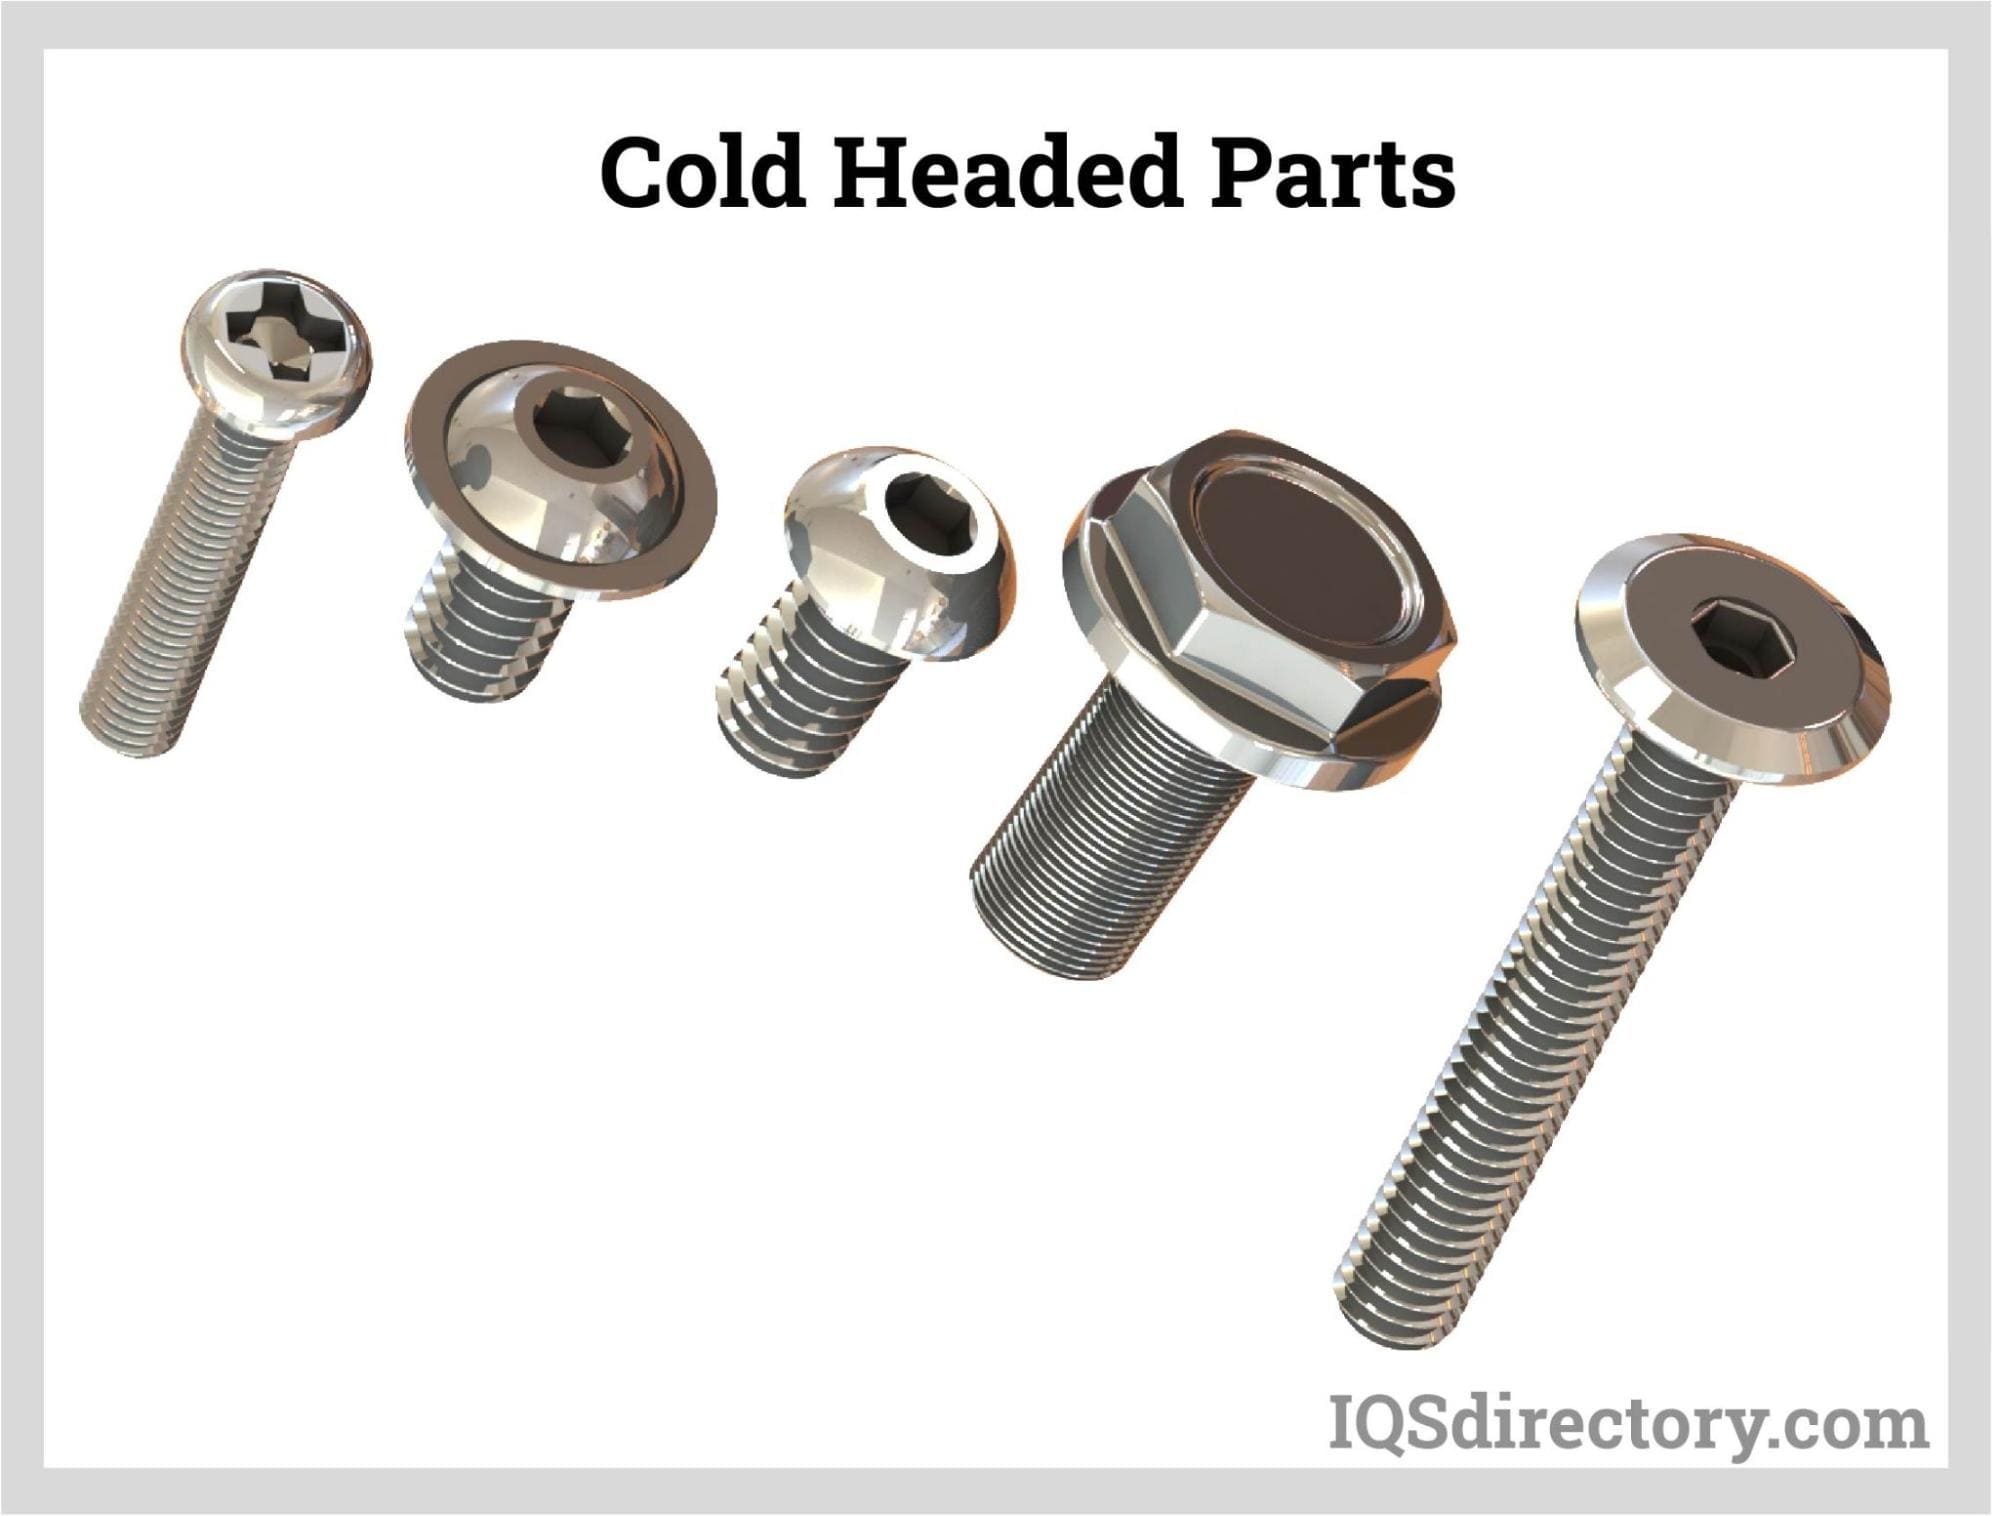 https://www.iqsdirectory.com/articles/cold-headed-parts/cold-heading-and-cold-forming/cold-headed-parts.jpg